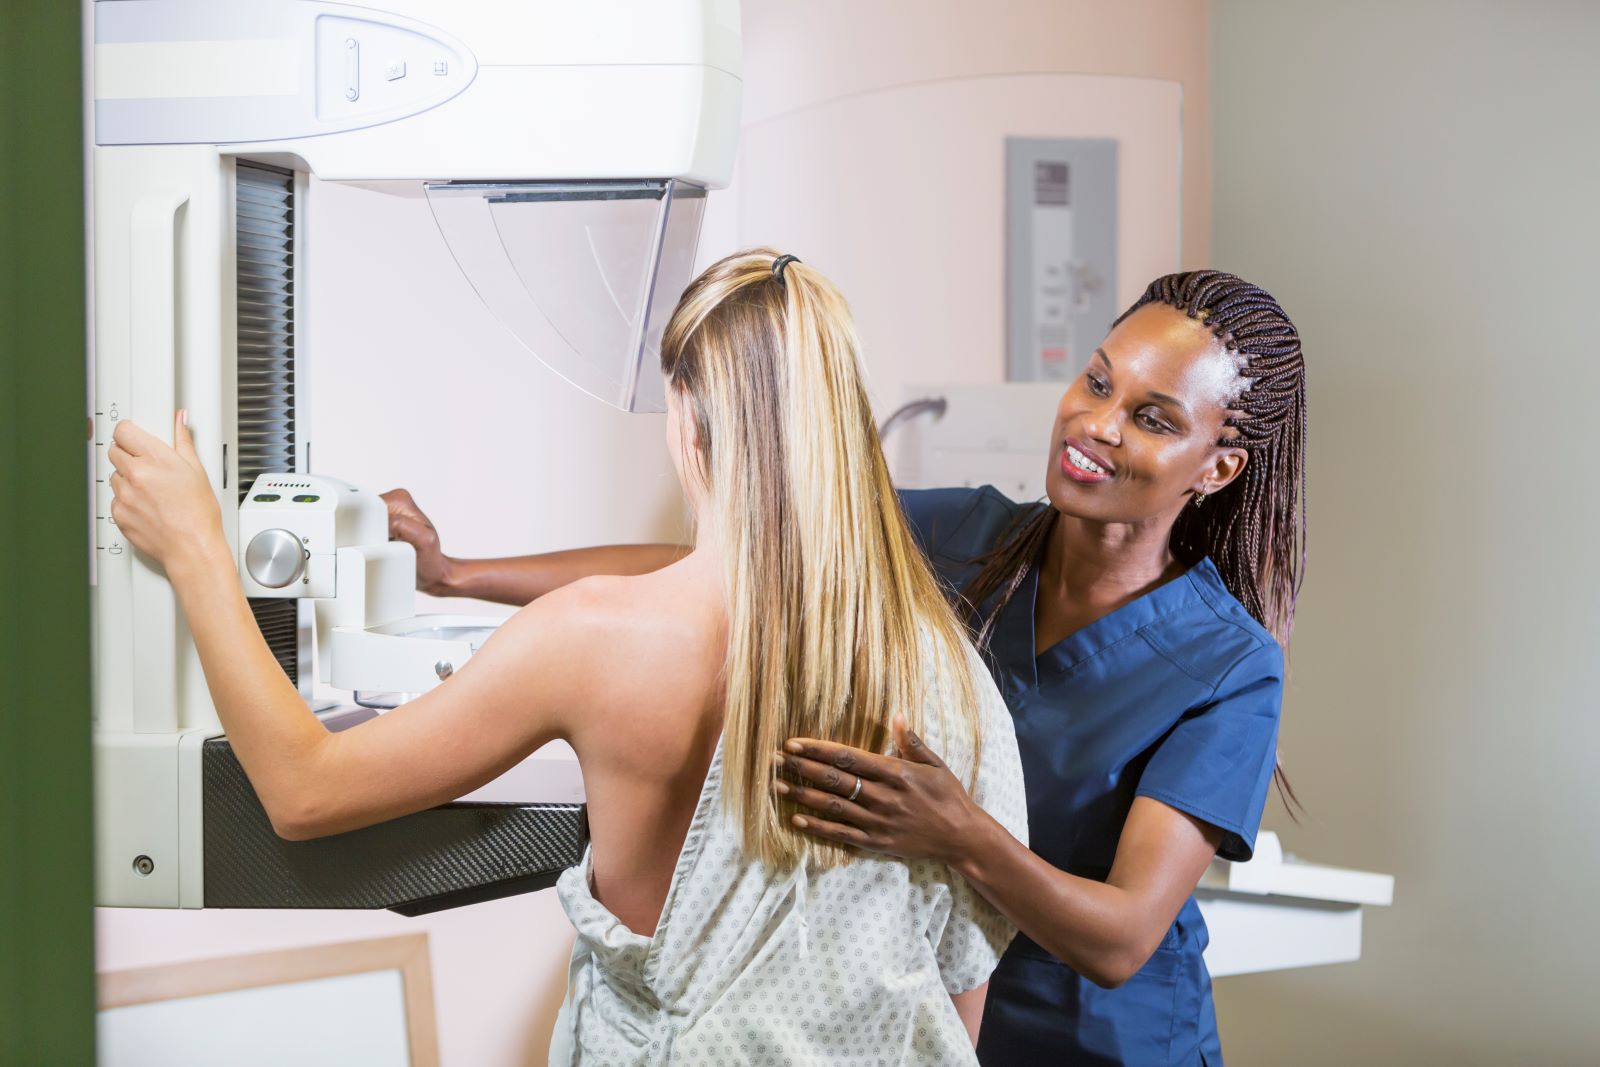 Younger Women Should Start Getting Mammograms, According to New Guidelines